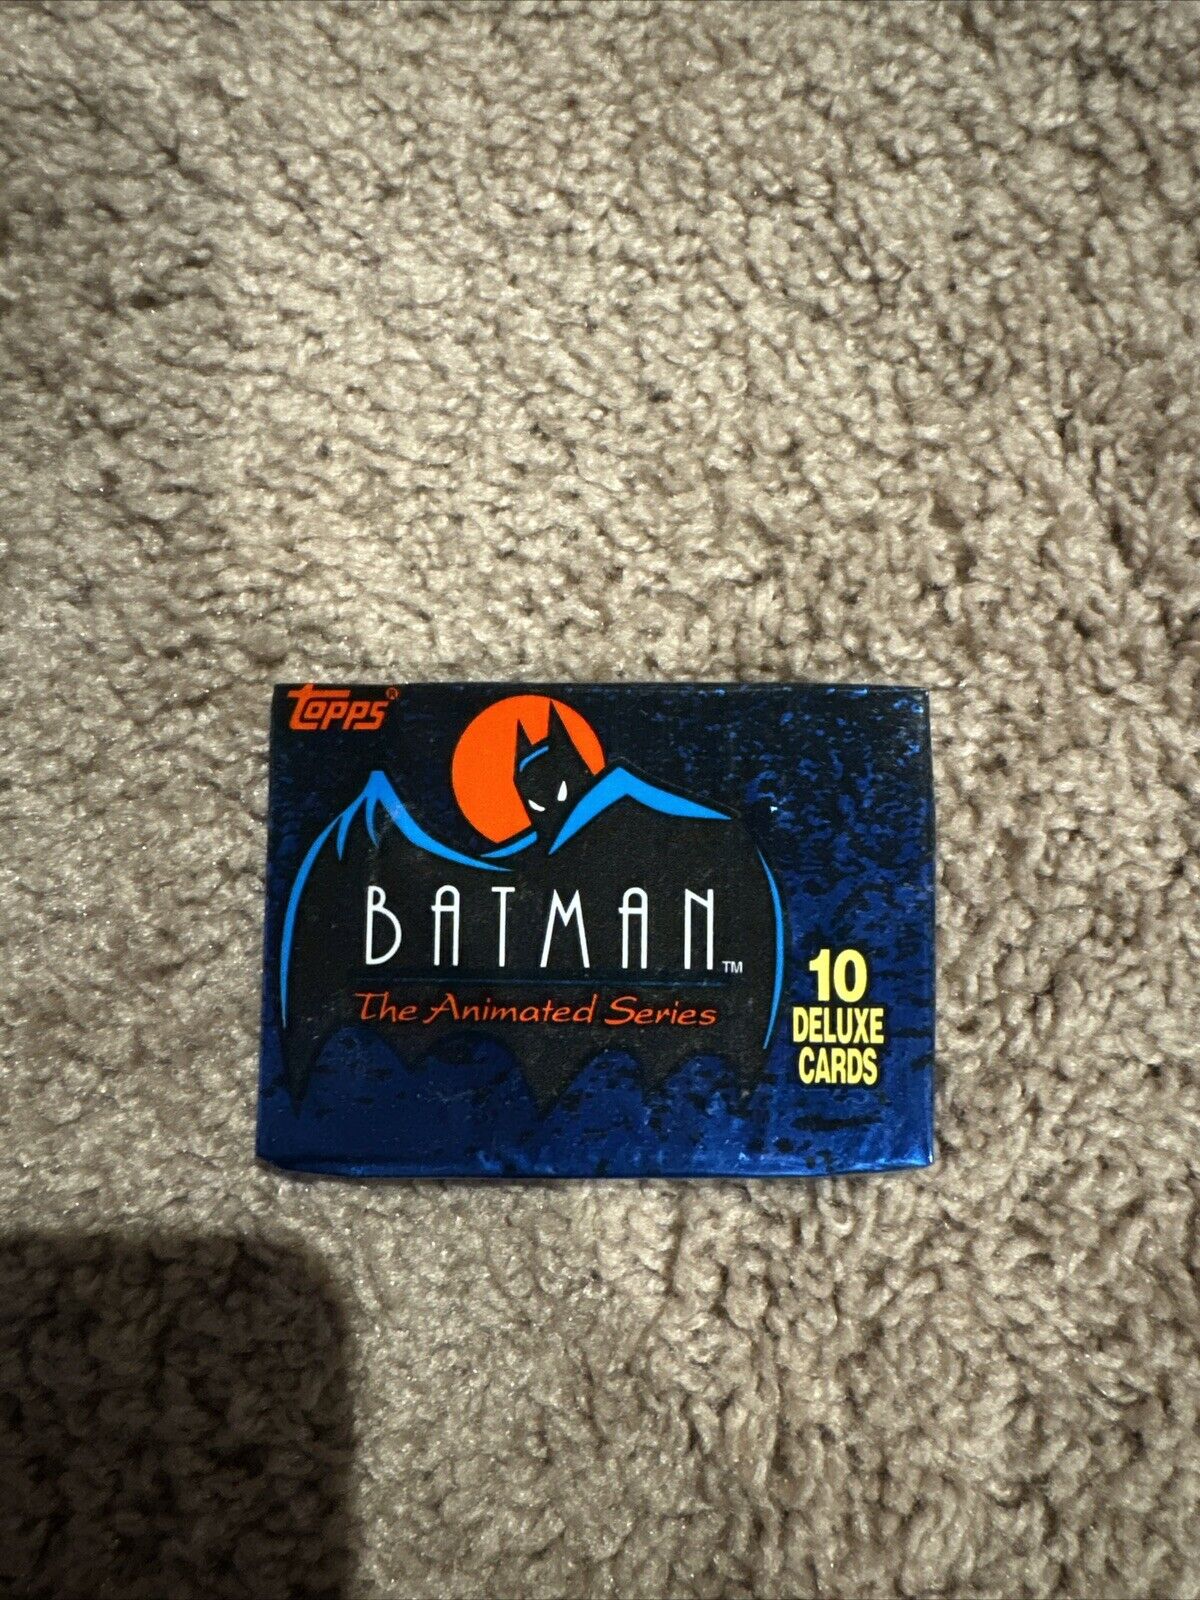 1993 Topps Batman The Animated Series Trading Cards 2 FACTORY SEALED Card Packs